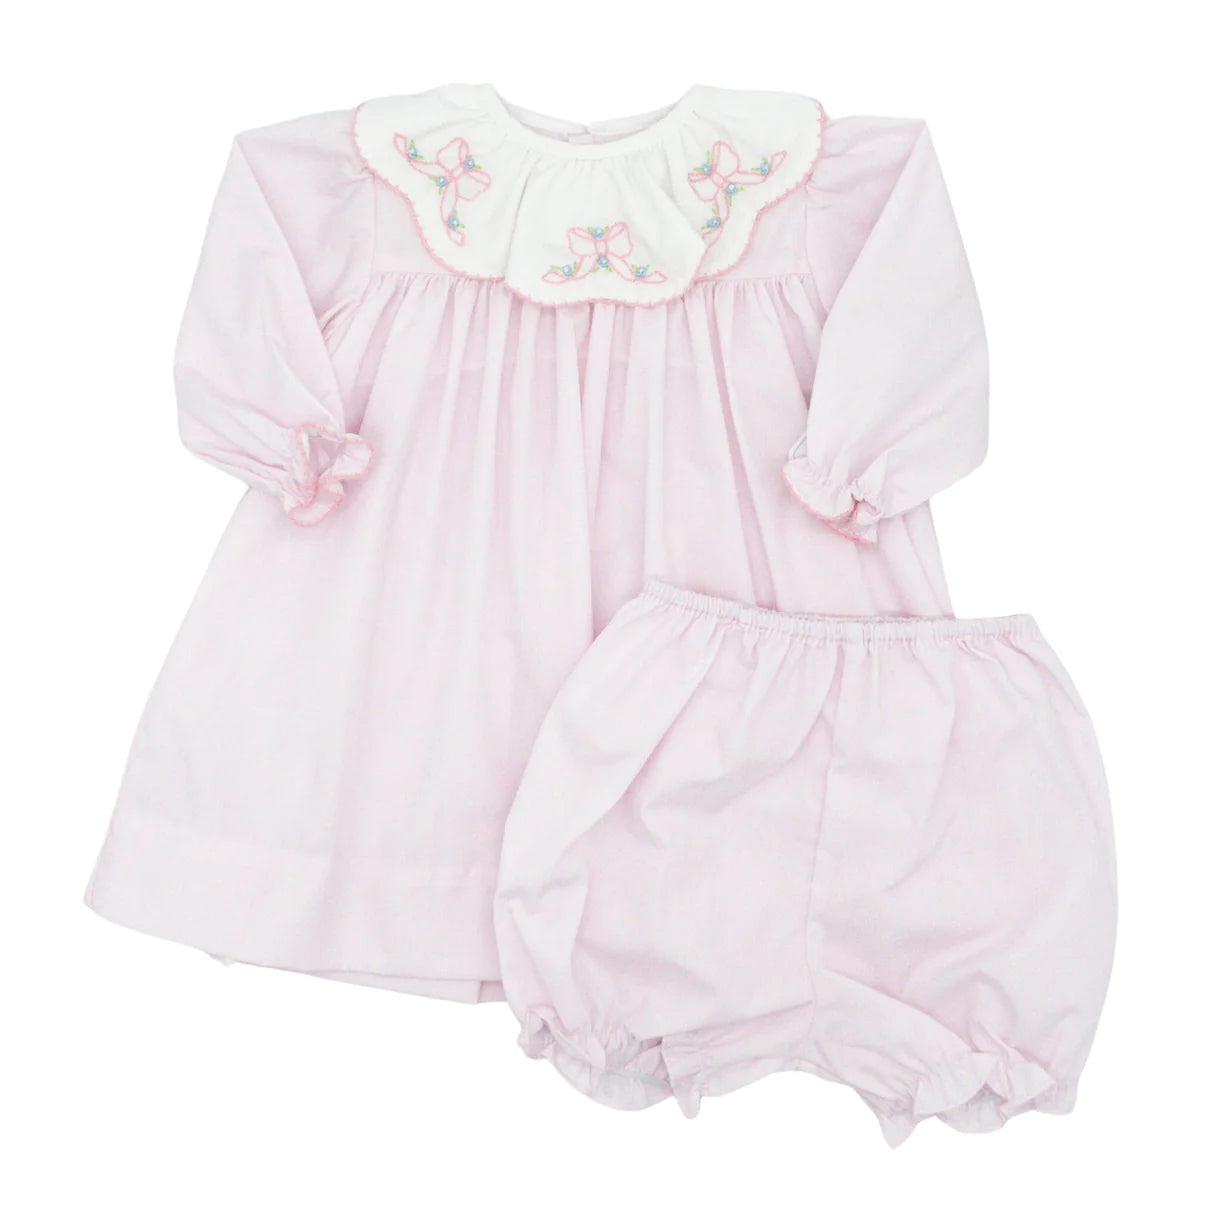 Emb Bow Collared Dress & Bloomer